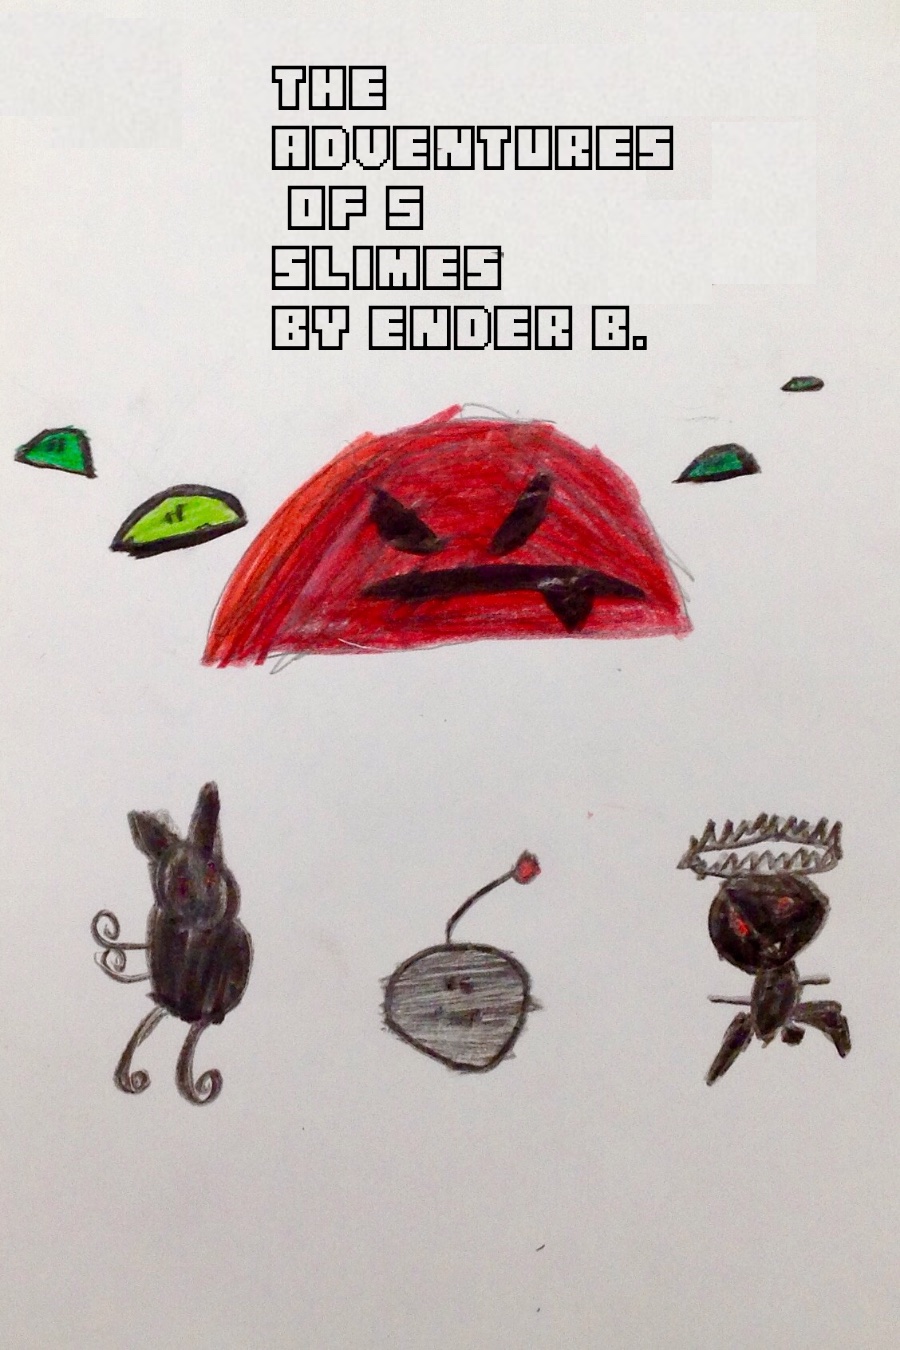 The Adventures of 5 Slimes by Ender B